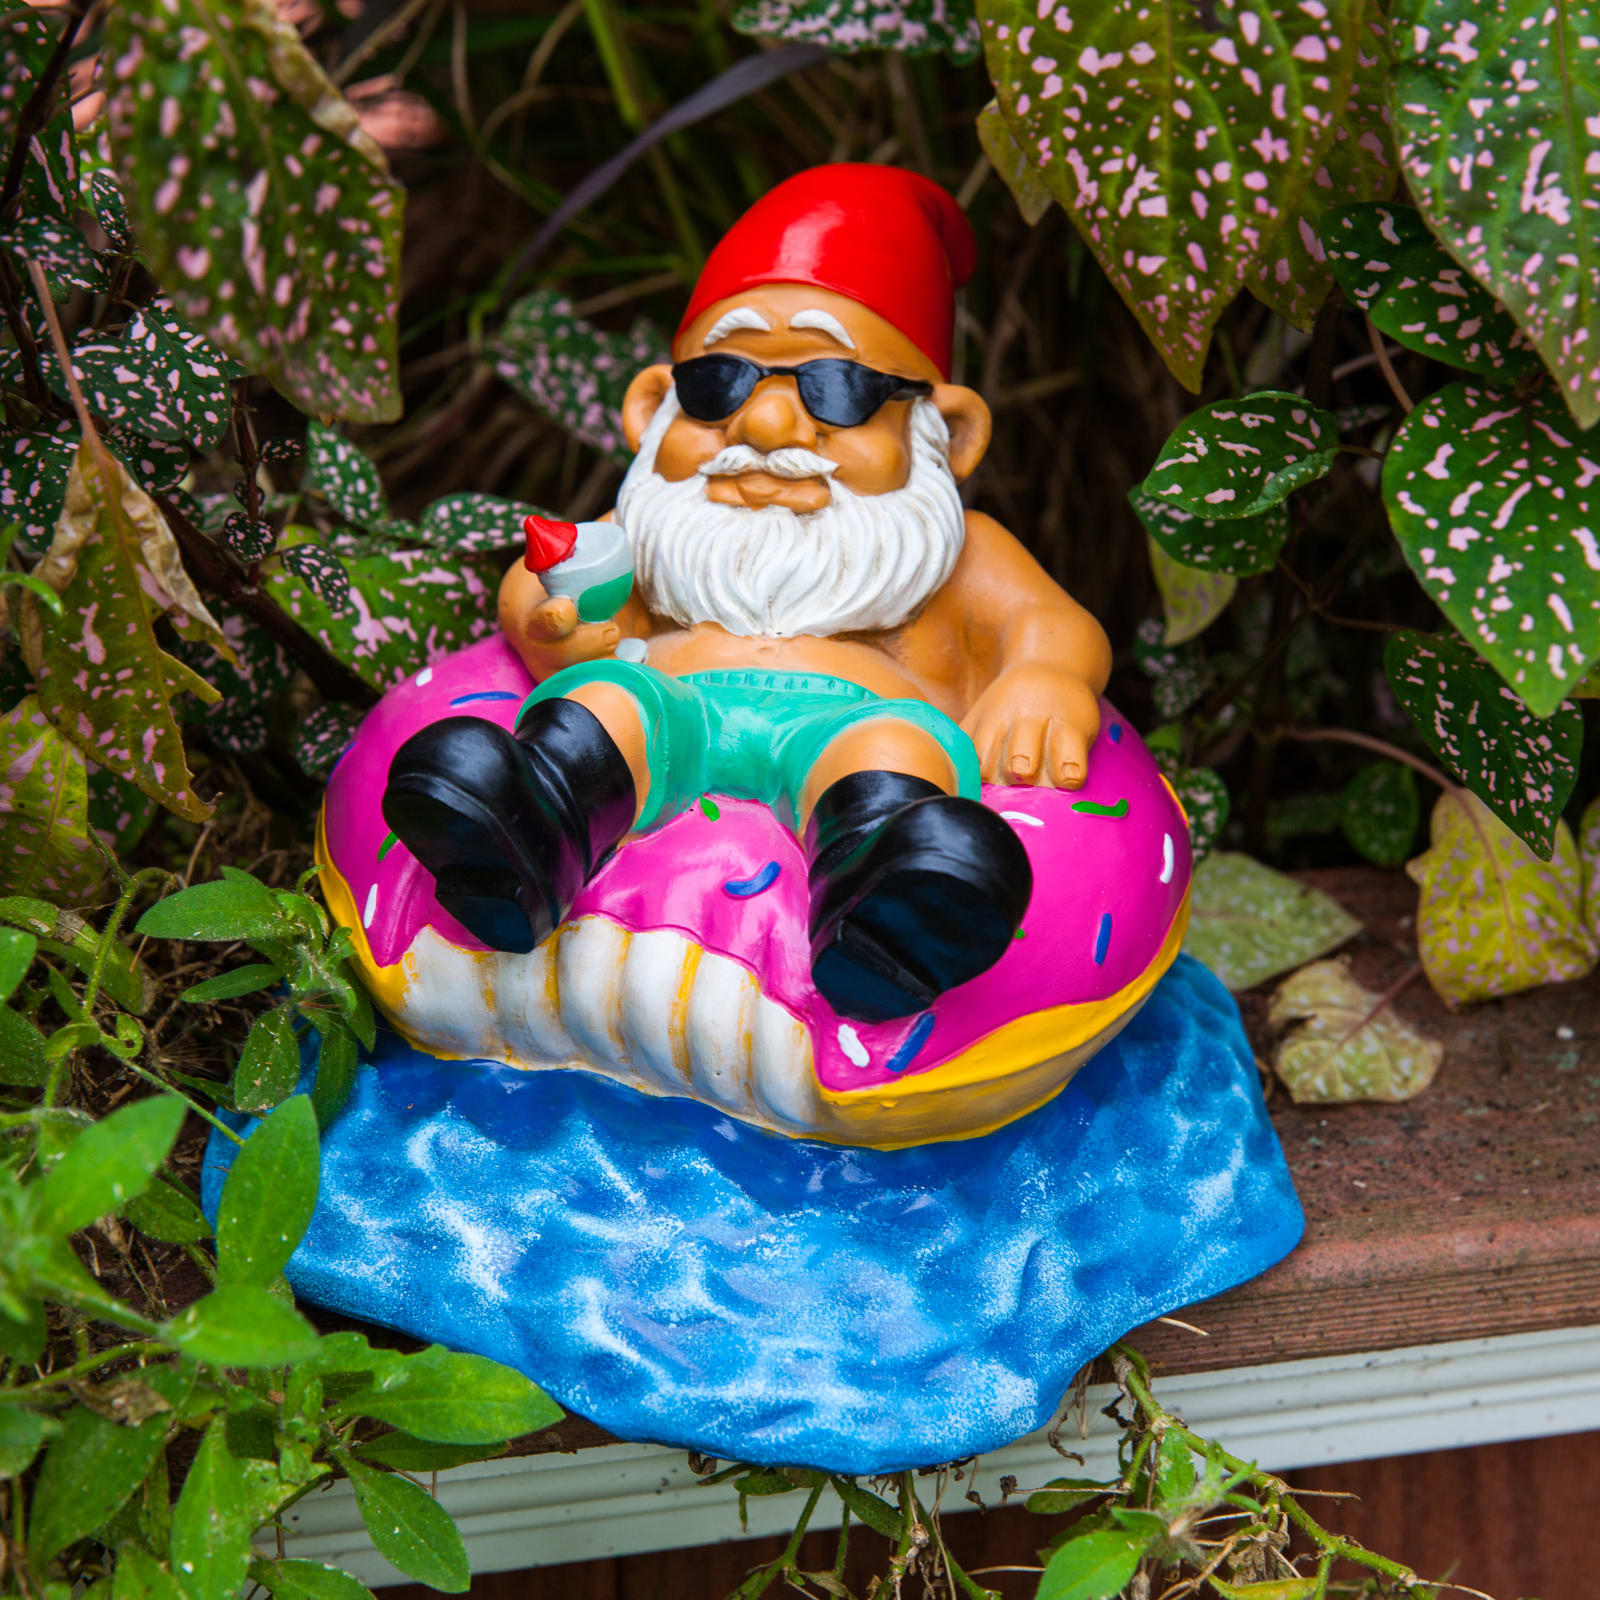 The Donut Worry Be Happy Garden Gnome